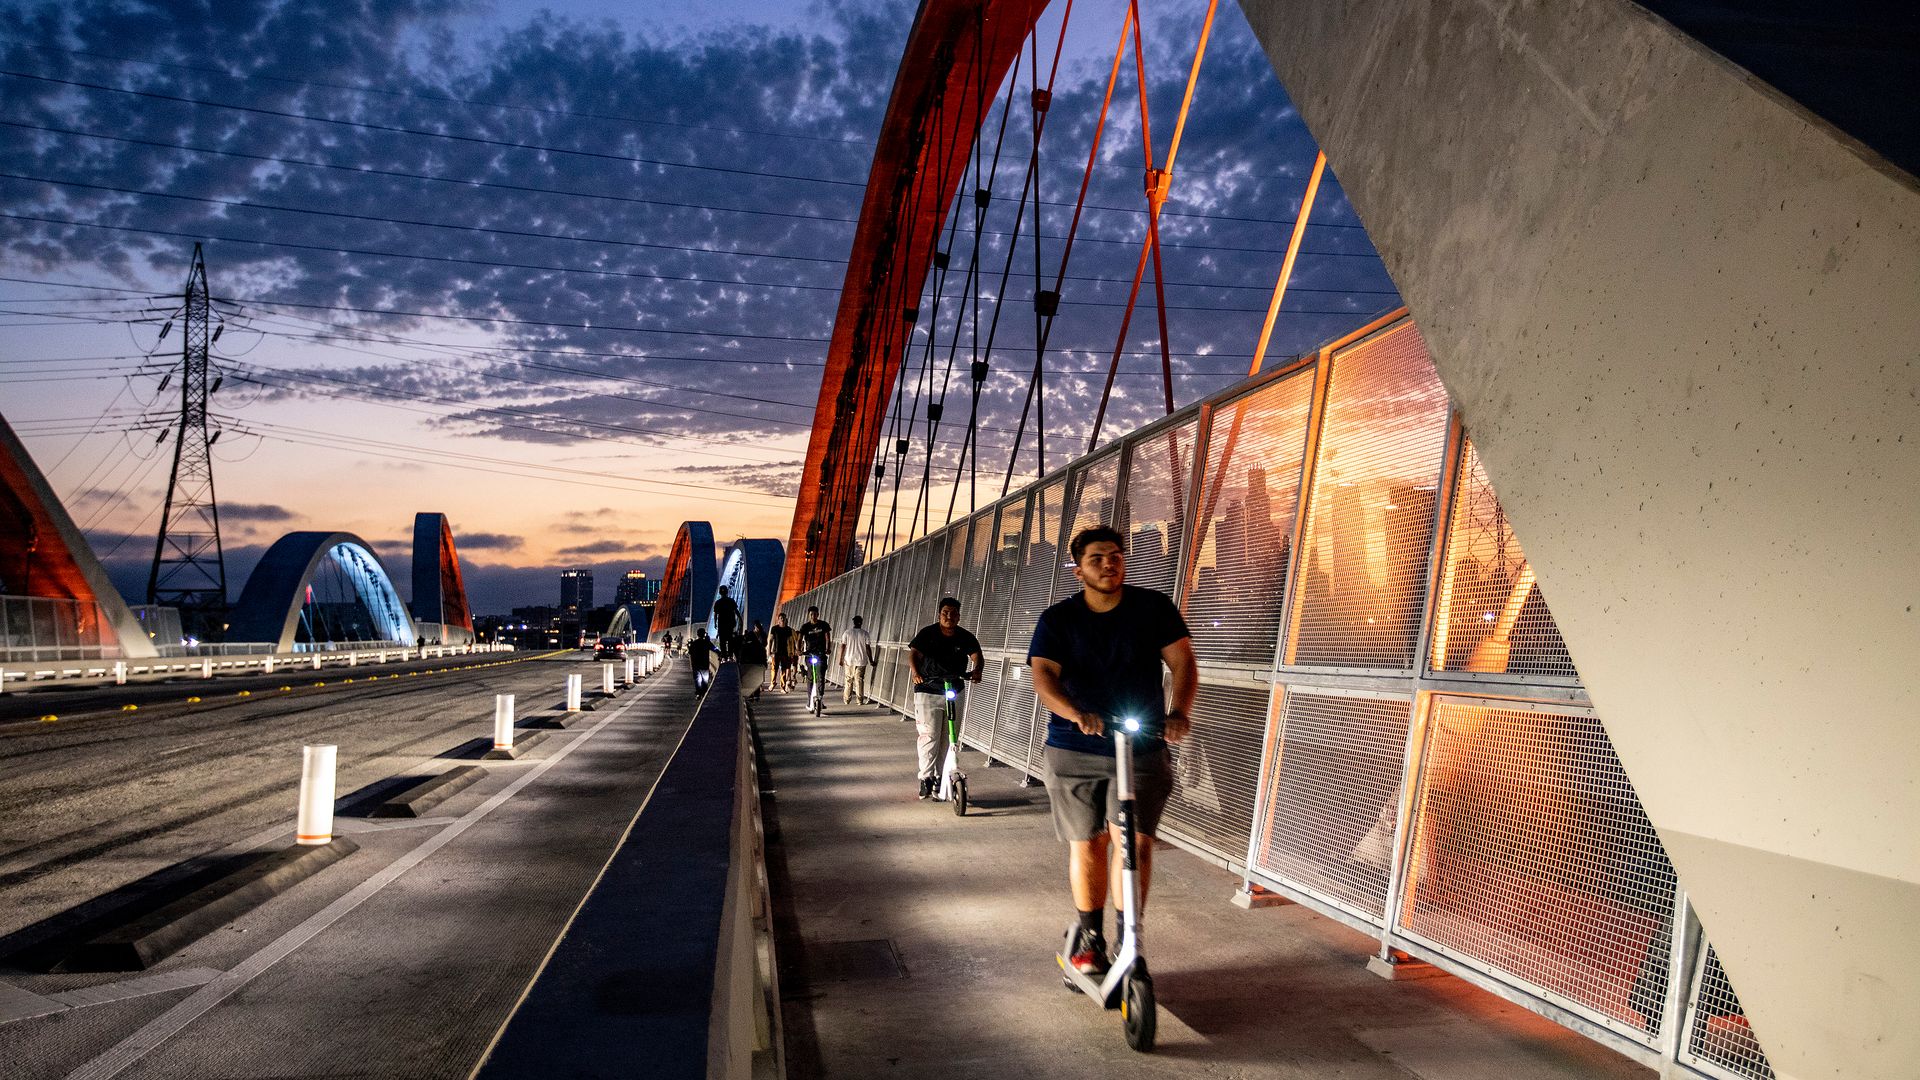 Pedestrians ride scooters on the Sixth Street Viaduct at dusk in Los Angeles, California, US, on Wednesday, July 27, 2022.